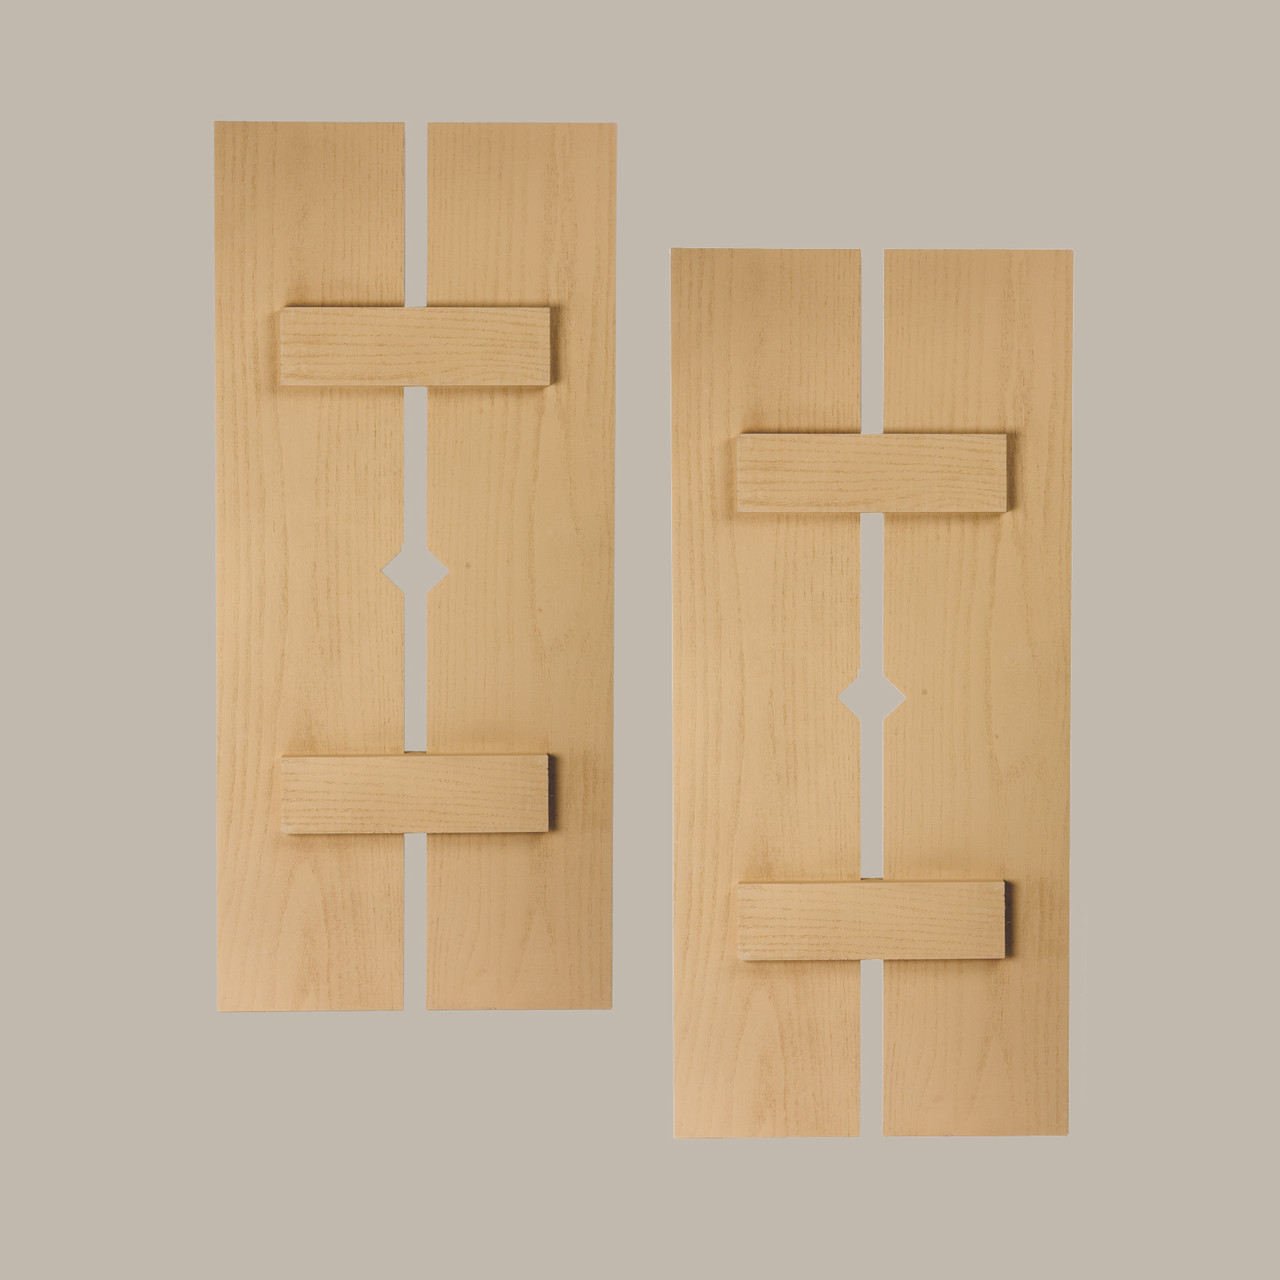 12 inch by 27 inch Plank Shutter with 2-Plank, Diamond